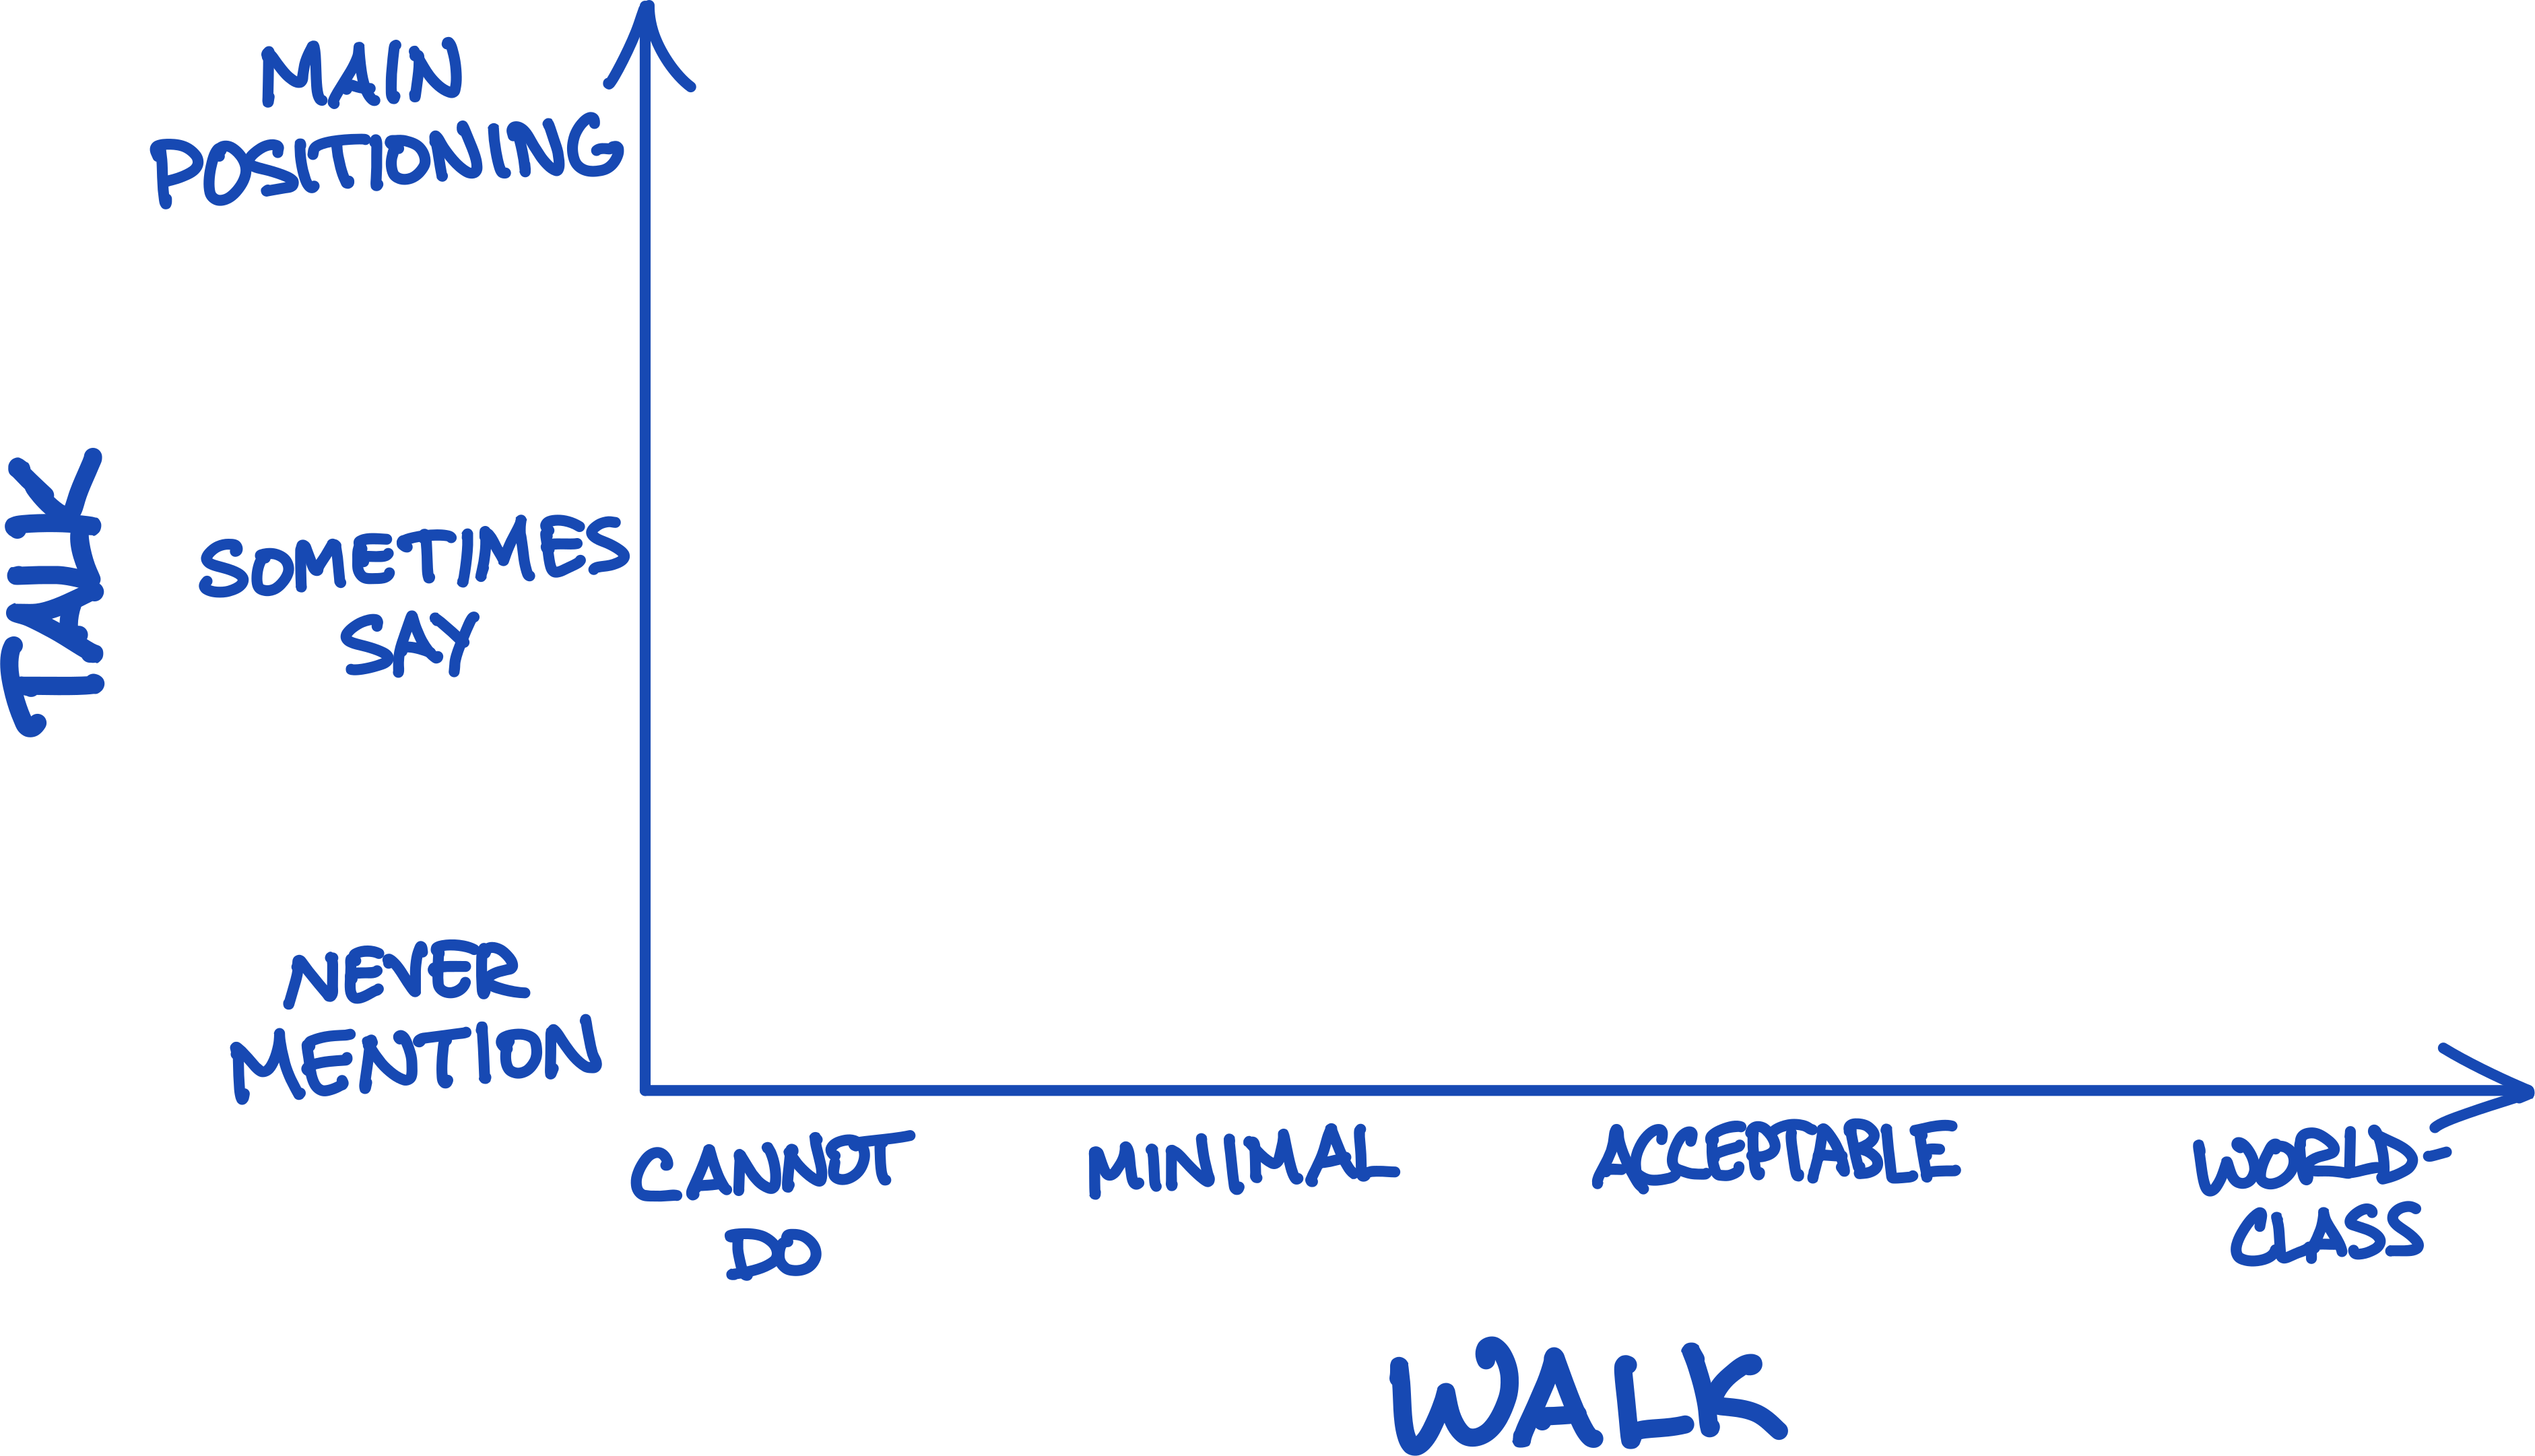 The two axes of the Talk/Walk Framework